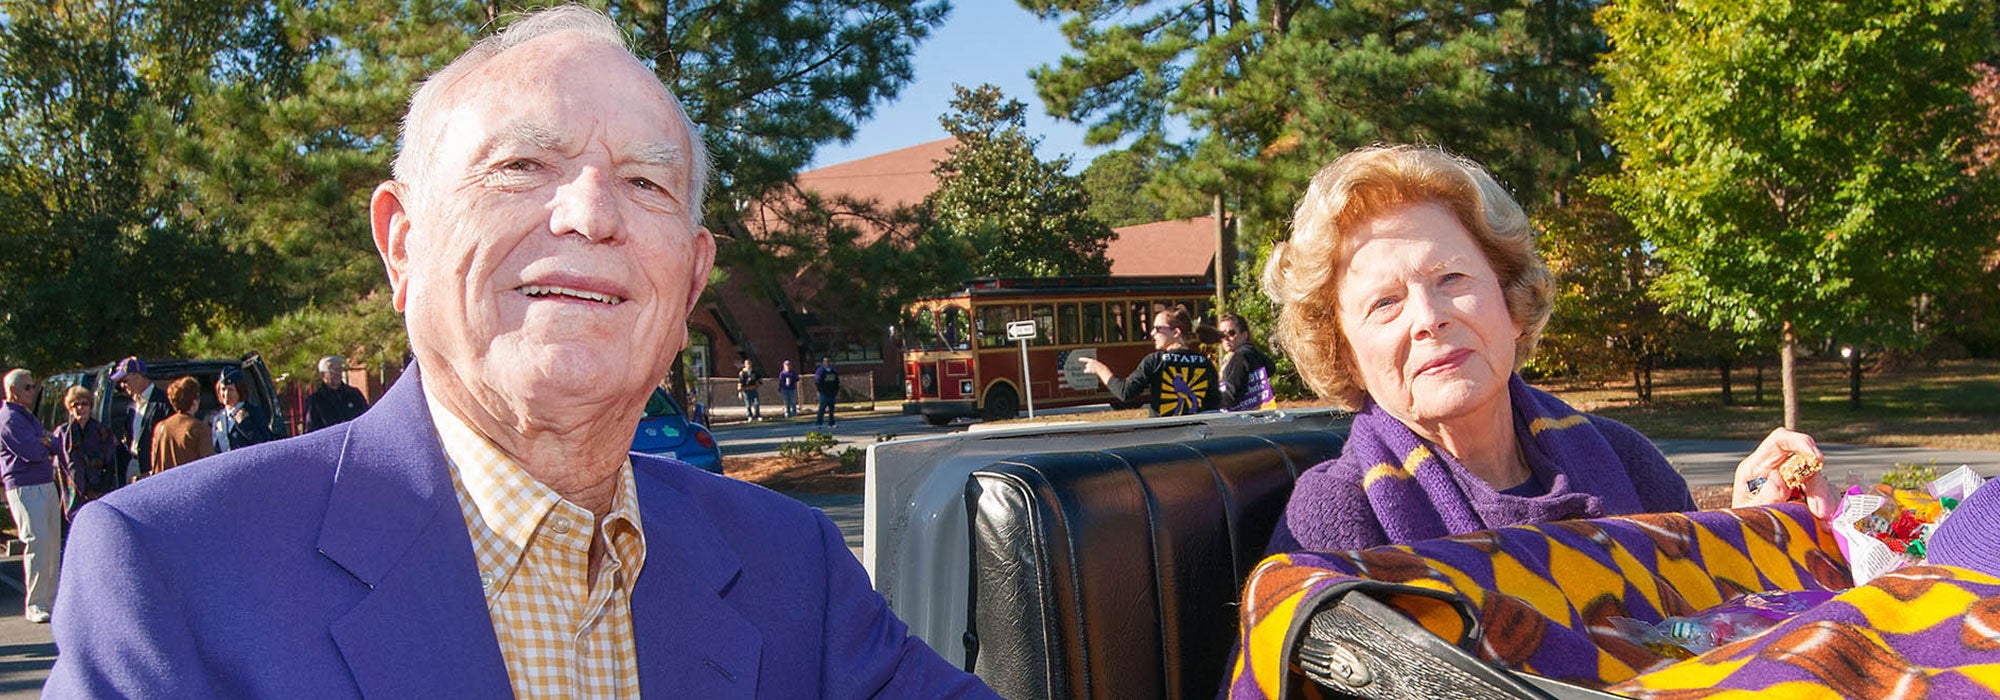 Walter Williams, who was honored during ECU’s 2010 Homecoming Parade, was one of the university’s most loyal advocates and benefactors.